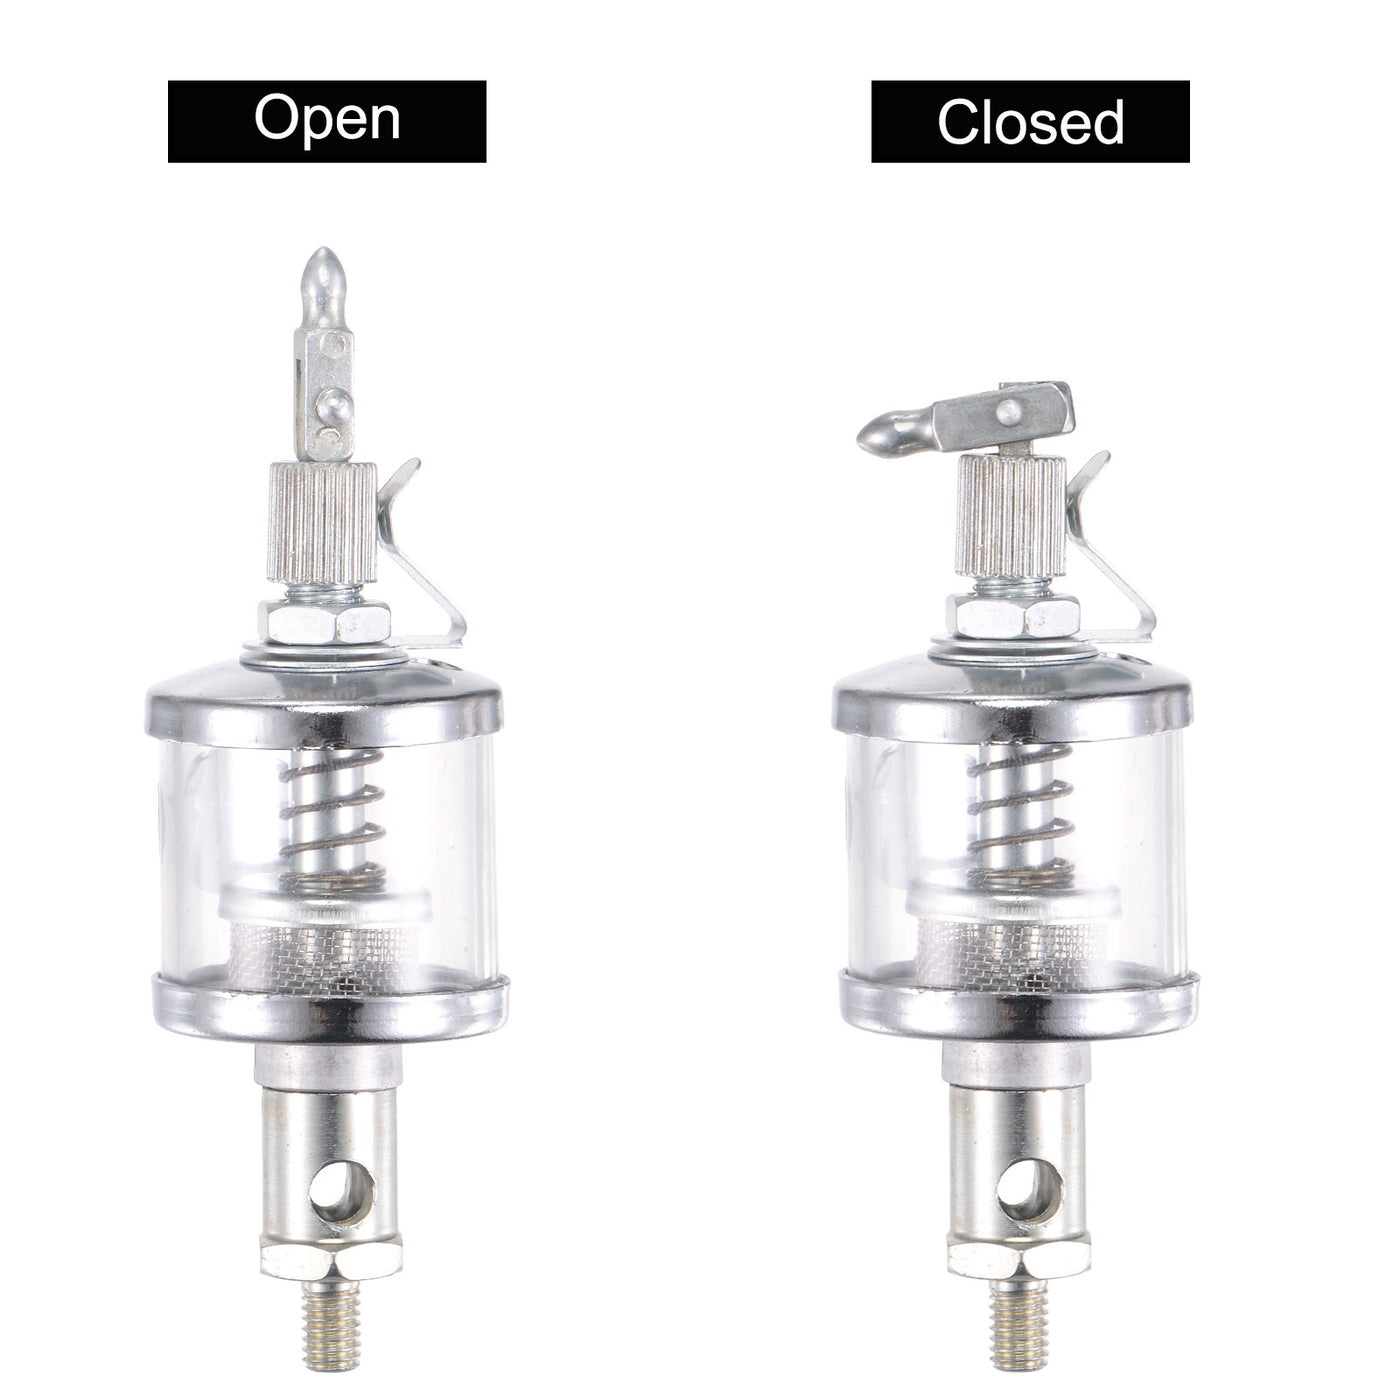 uxcell Uxcell Needle Valve Type Oil Cup M6x1 Thread 16ml Sight Gravity Drip Feed Oiler